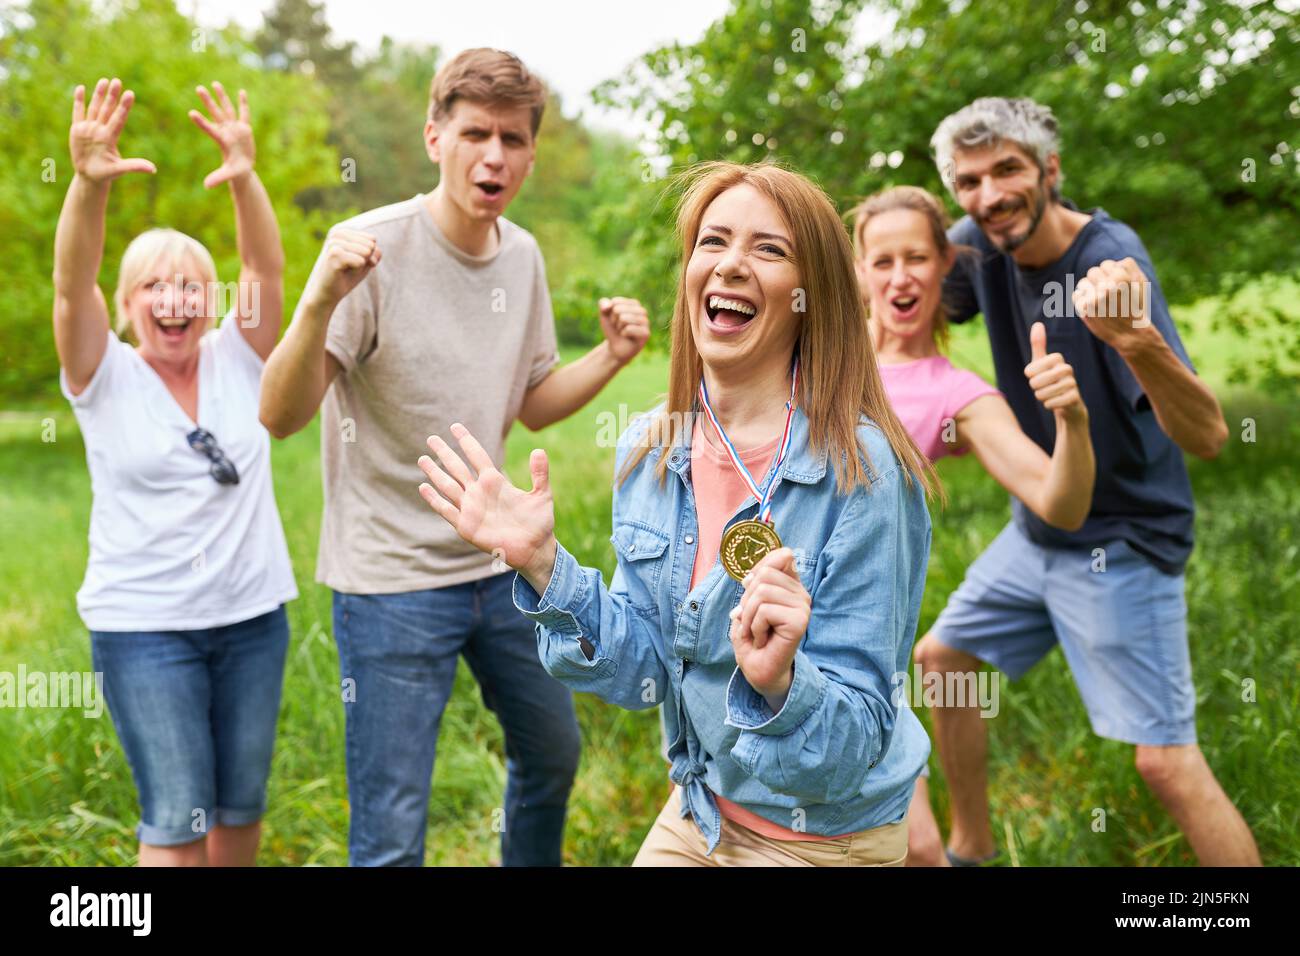 Cheering team and young woman with winner medal after a success at team event Stock Photo